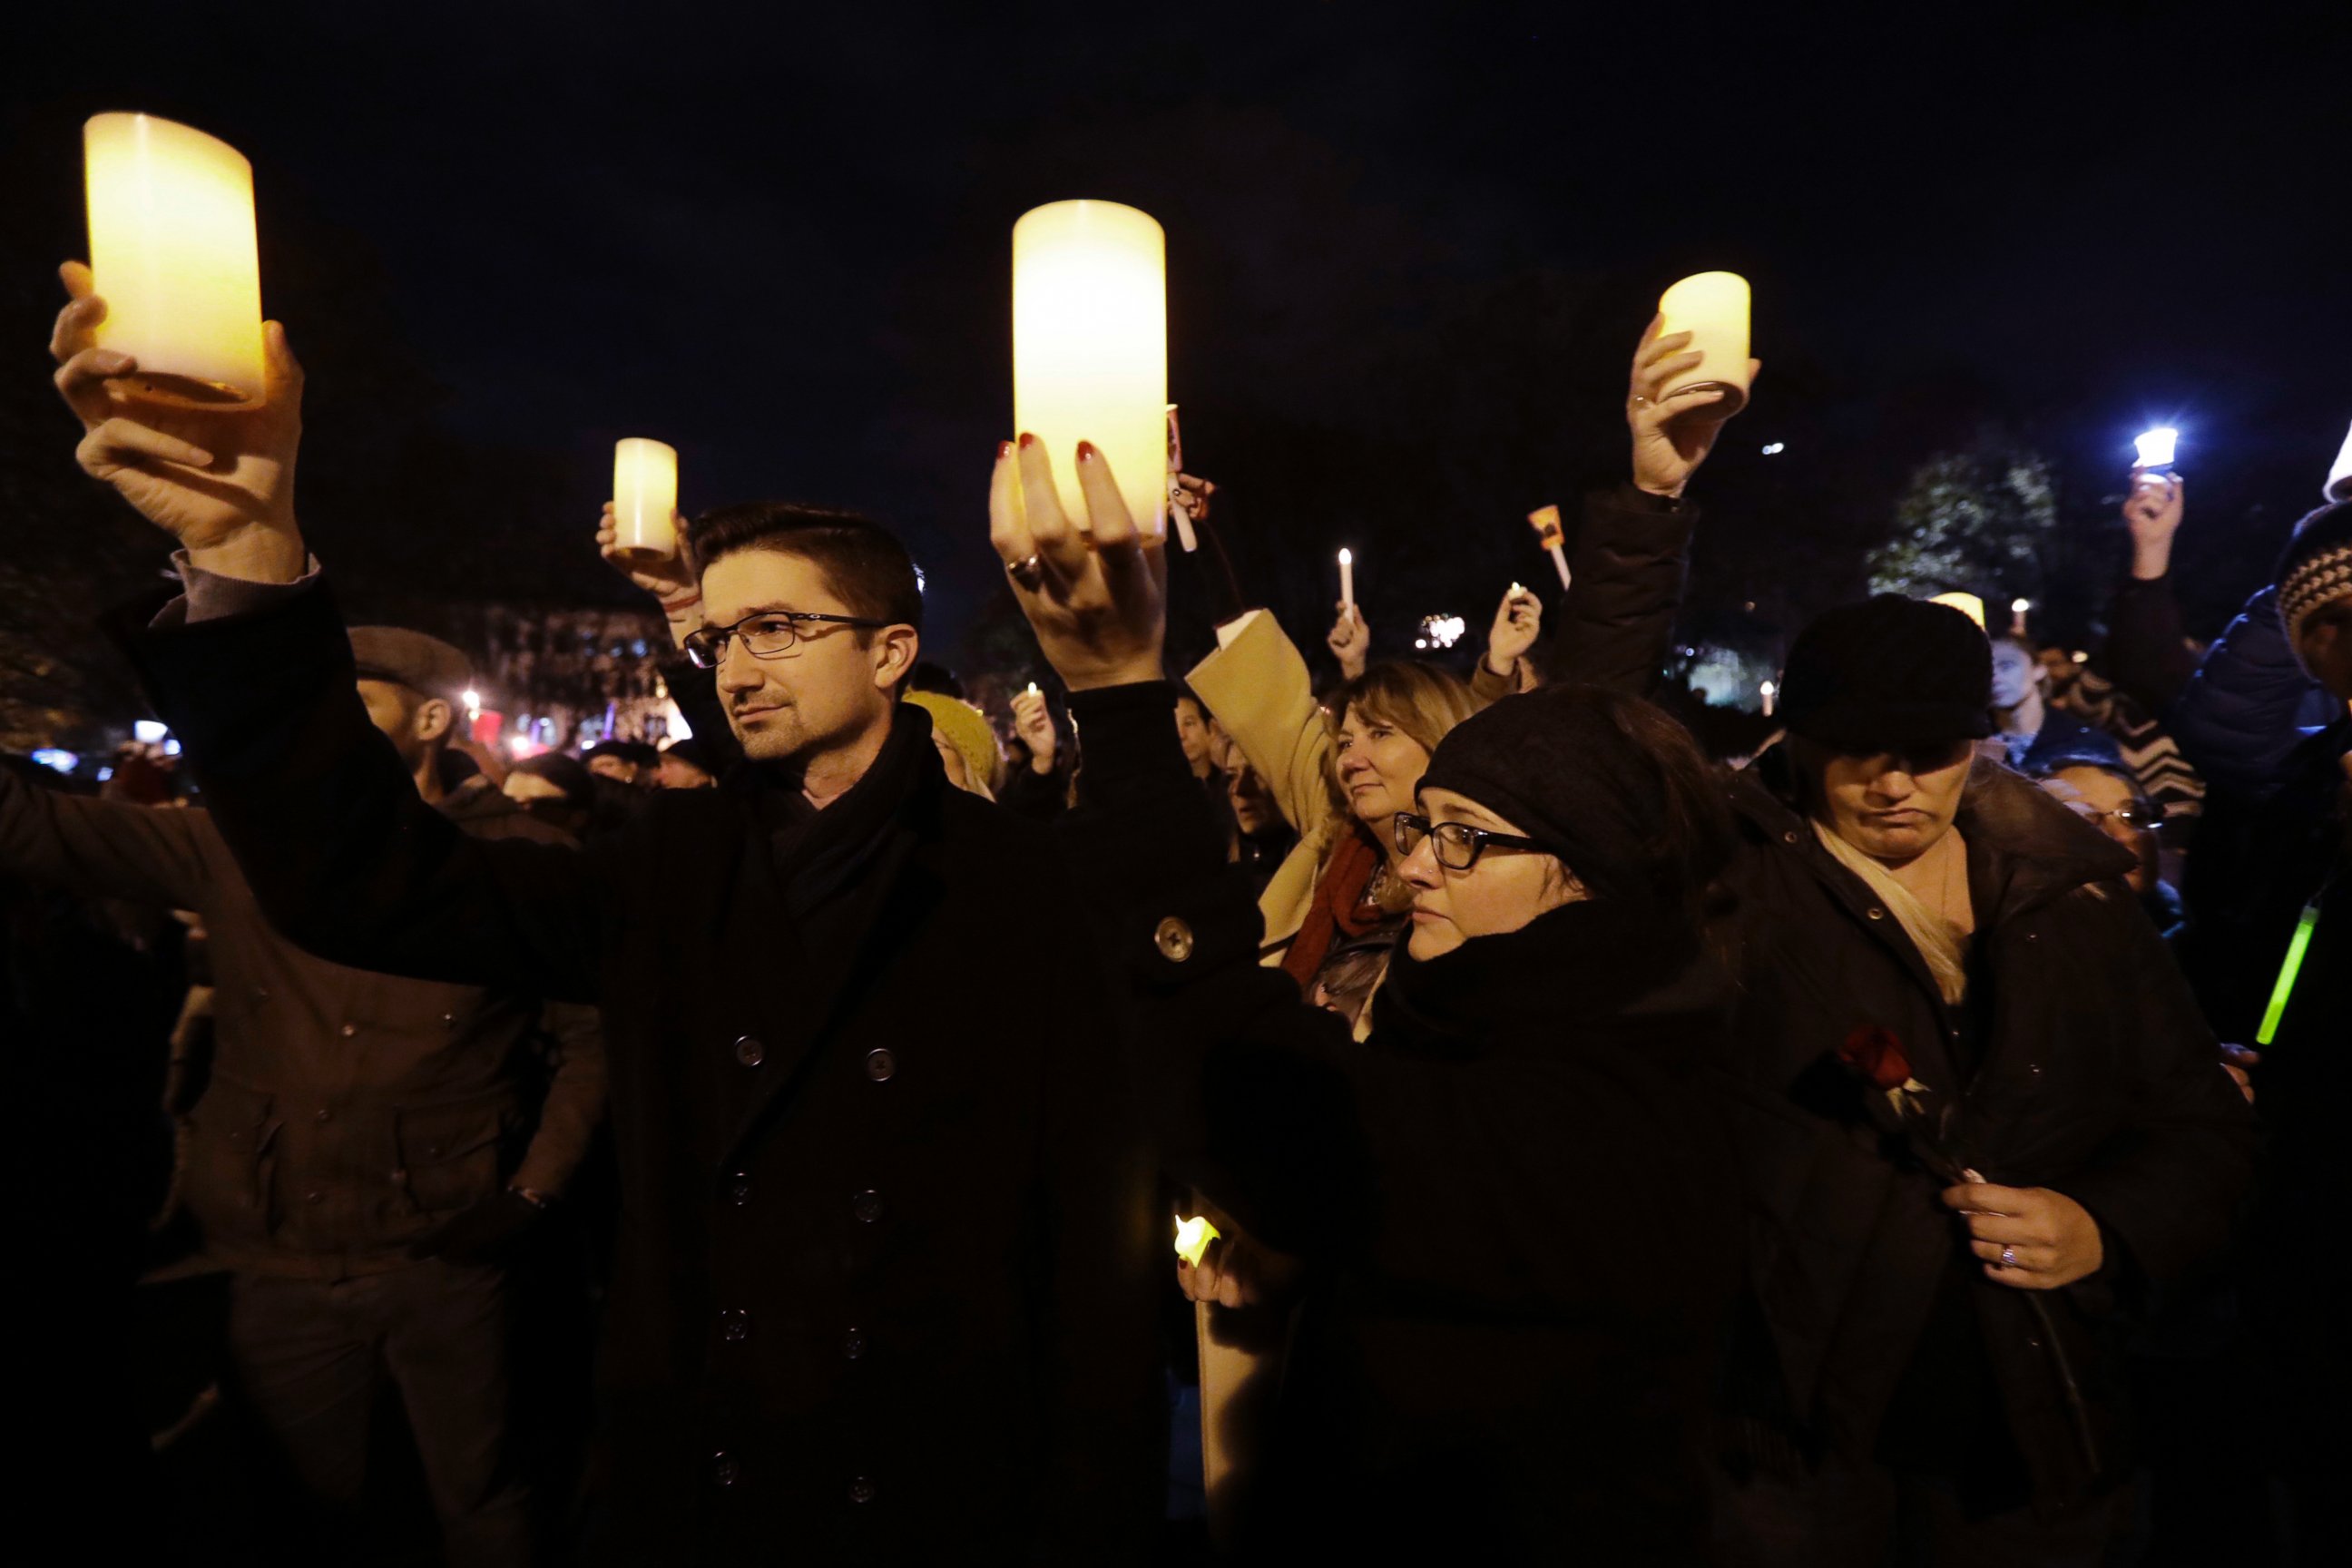 Relatives of Travis Hough hold candles during a vigil in memory of victims of a warehouse fire at Lake Merritt on Monday, Dec. 5, 2016, in Oakland, Calif.